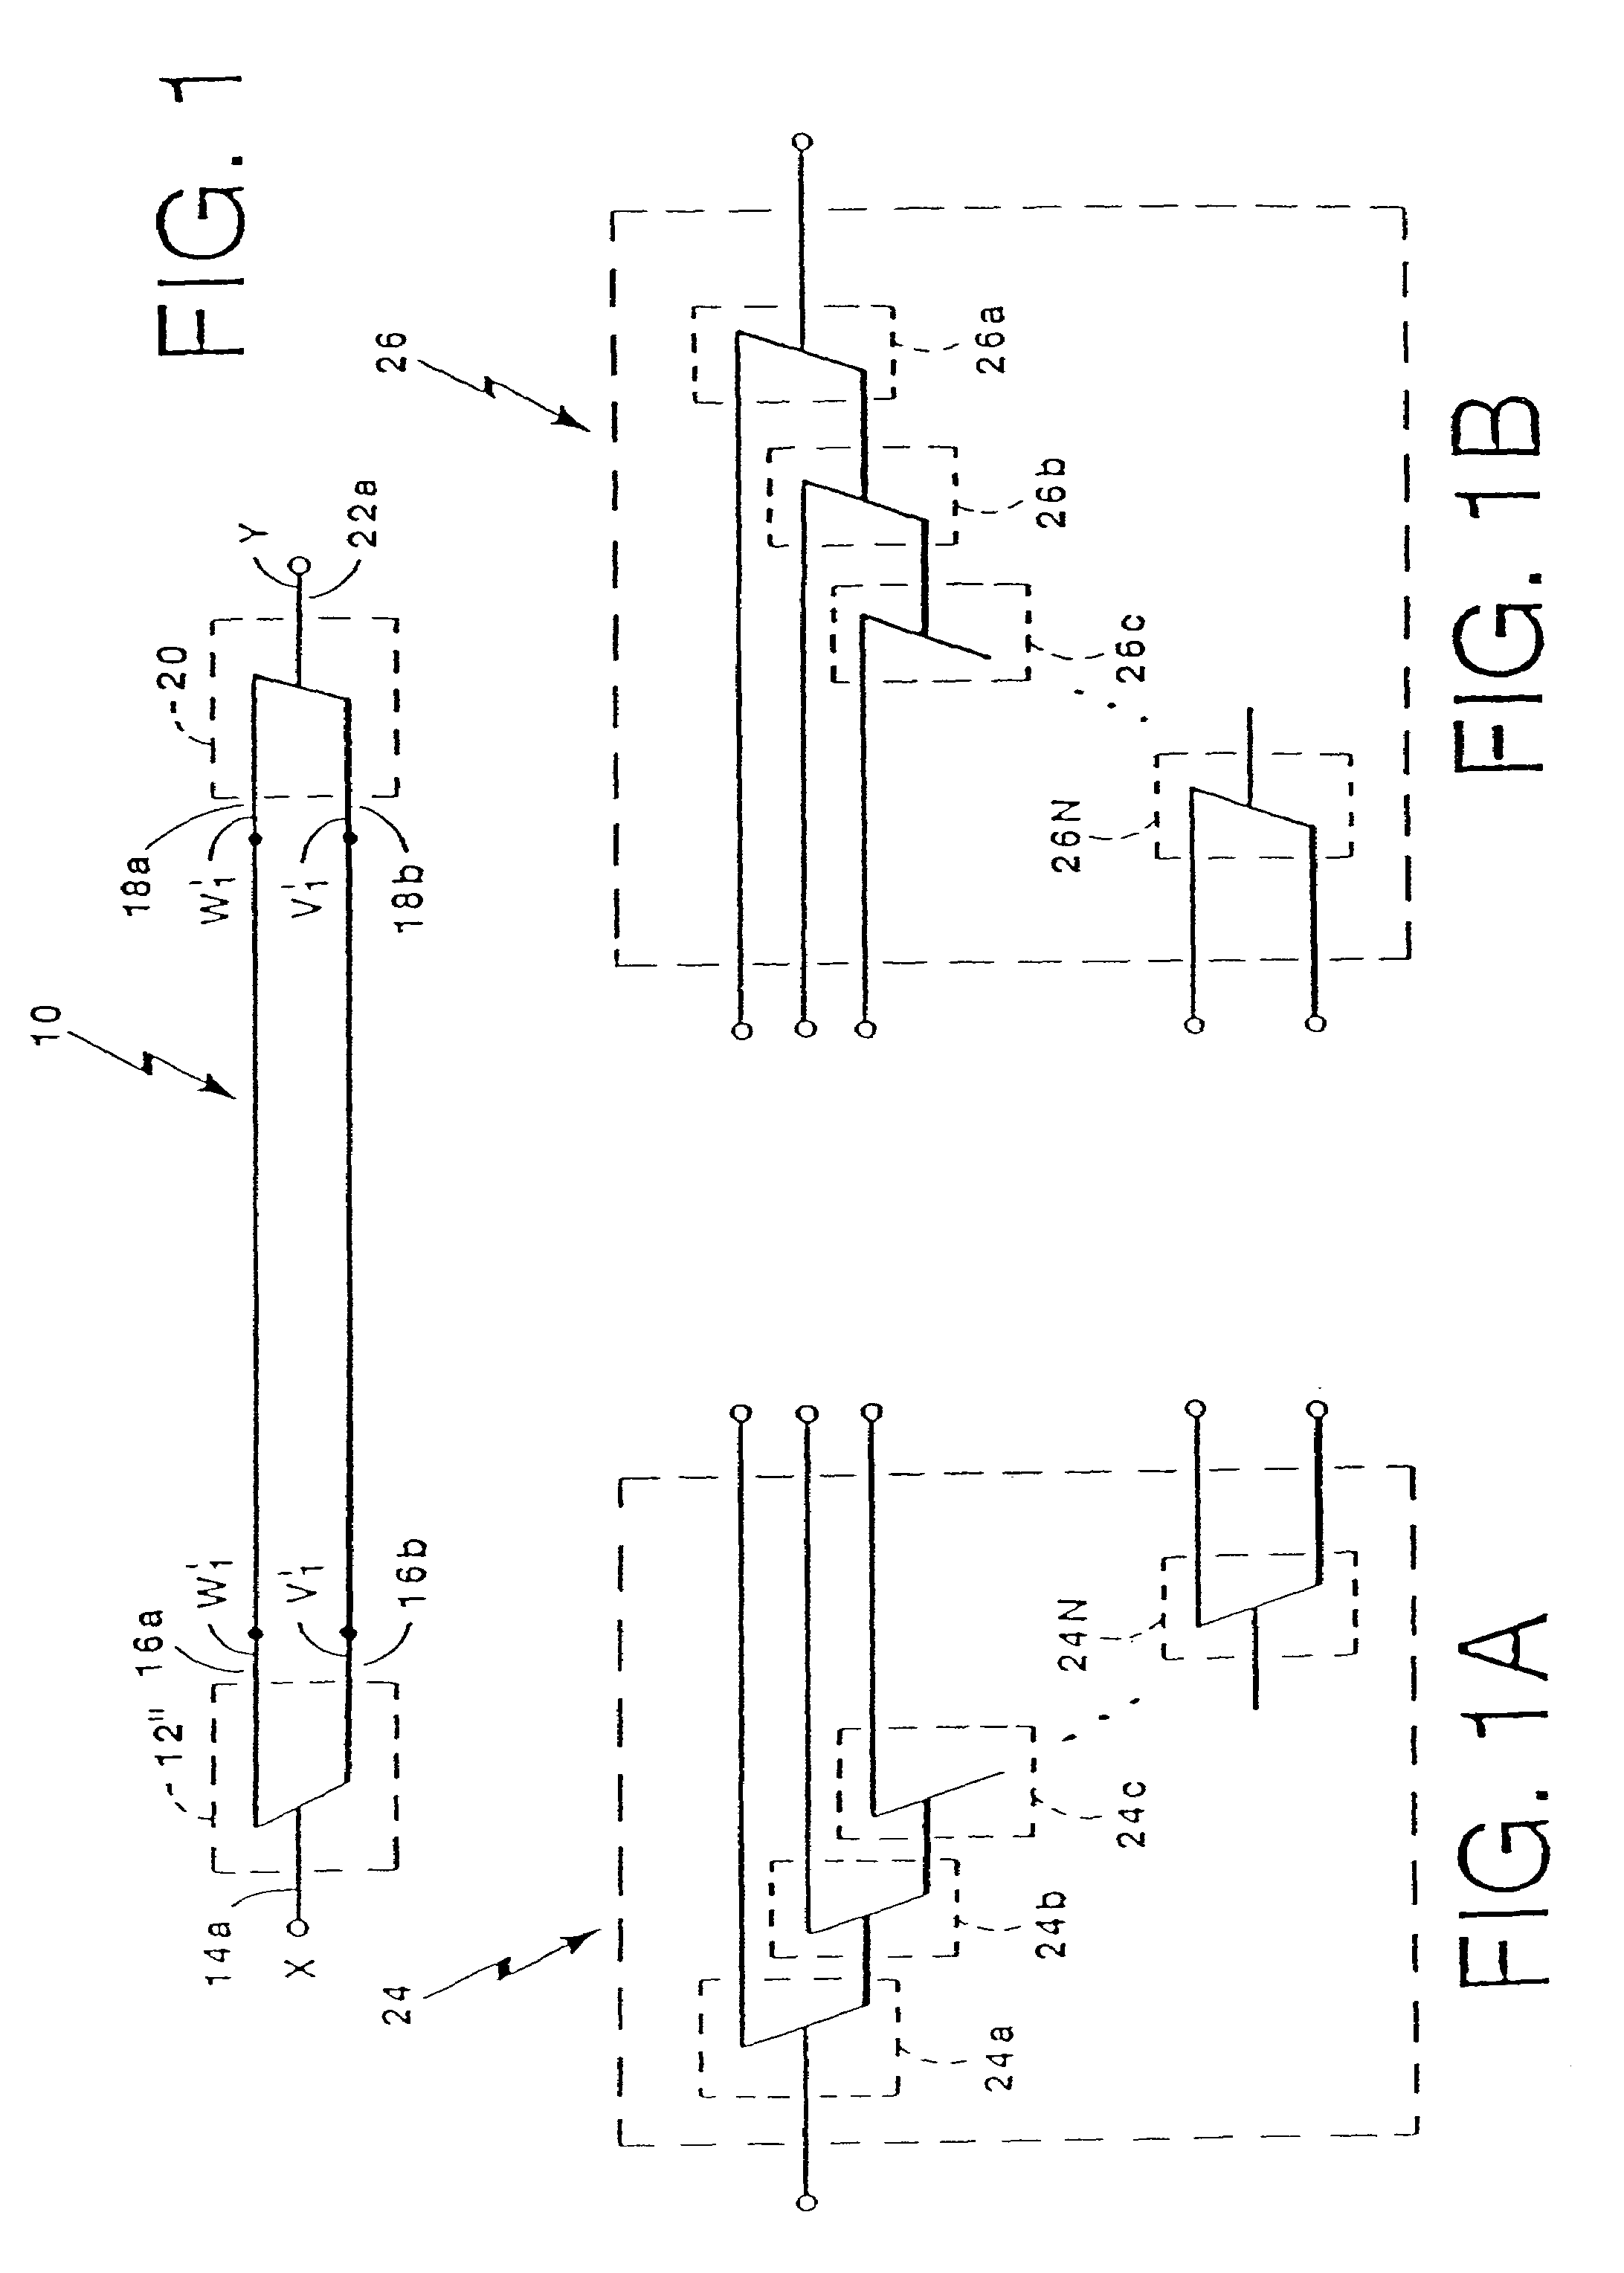 Compensation for non-linear distortion in a modem receiver